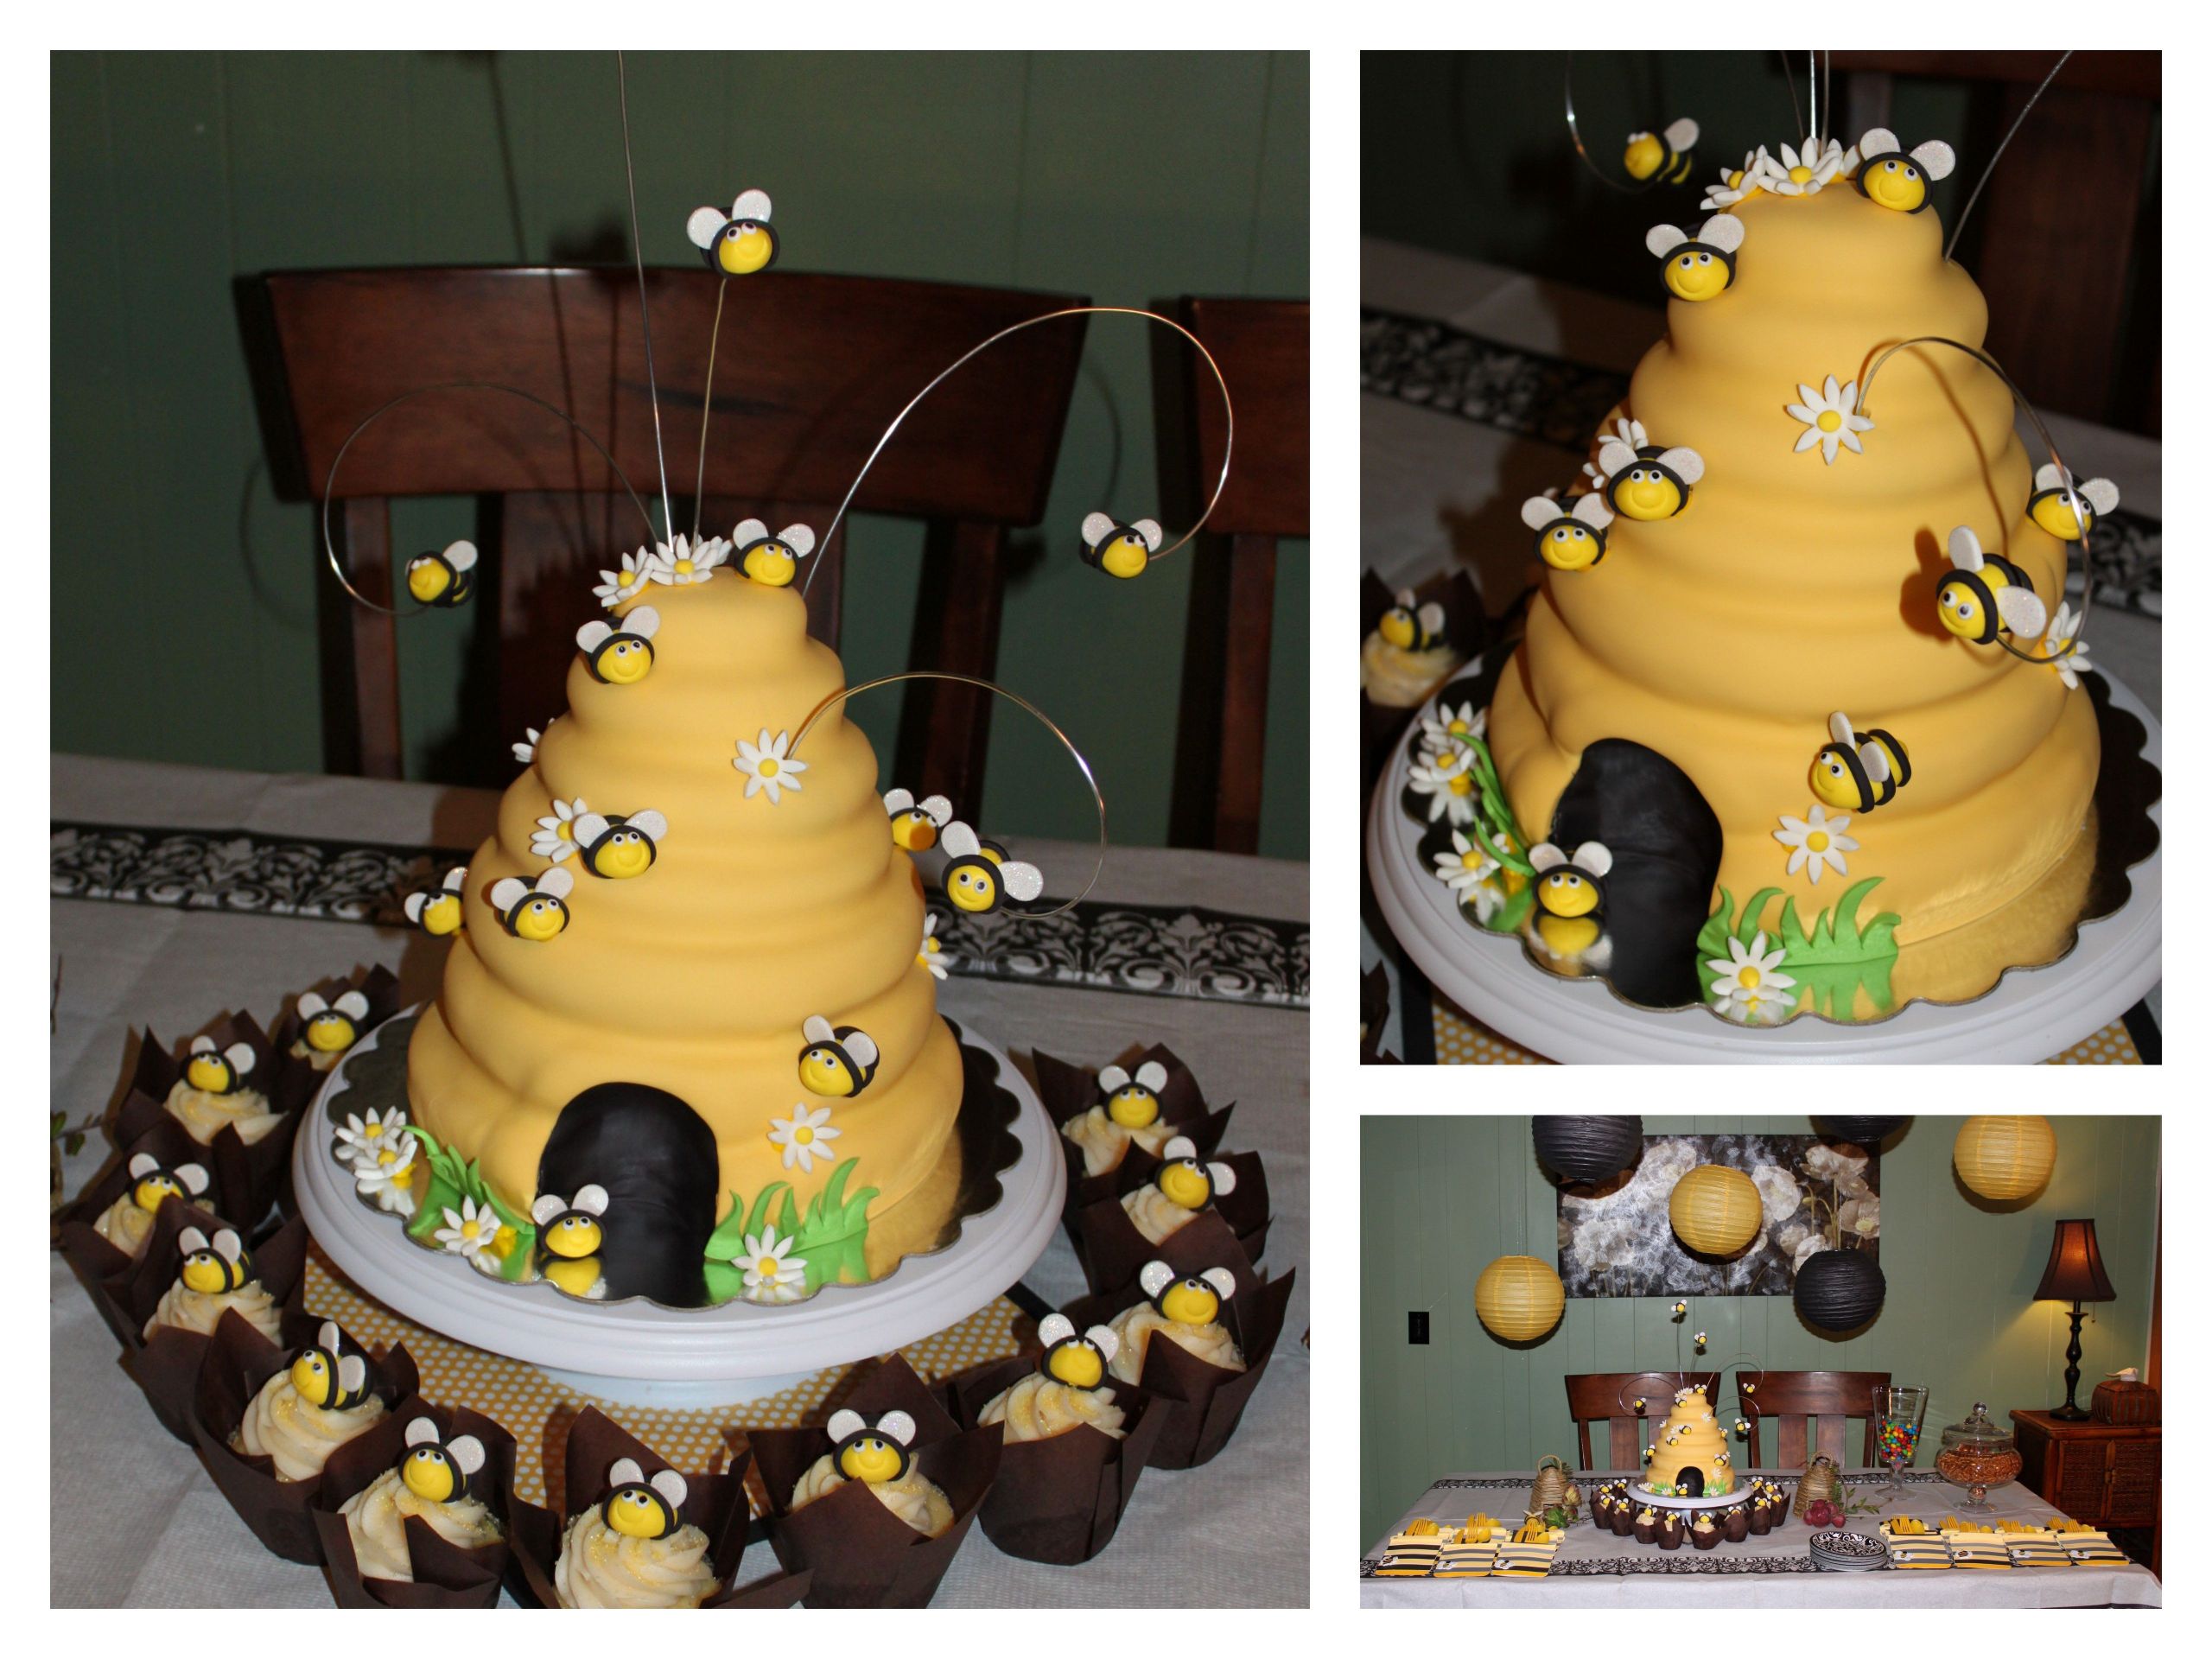 39Th Birthday Party Ideas
 Jenny s 39th Birthday Cake "Bee"cause she is the Queen